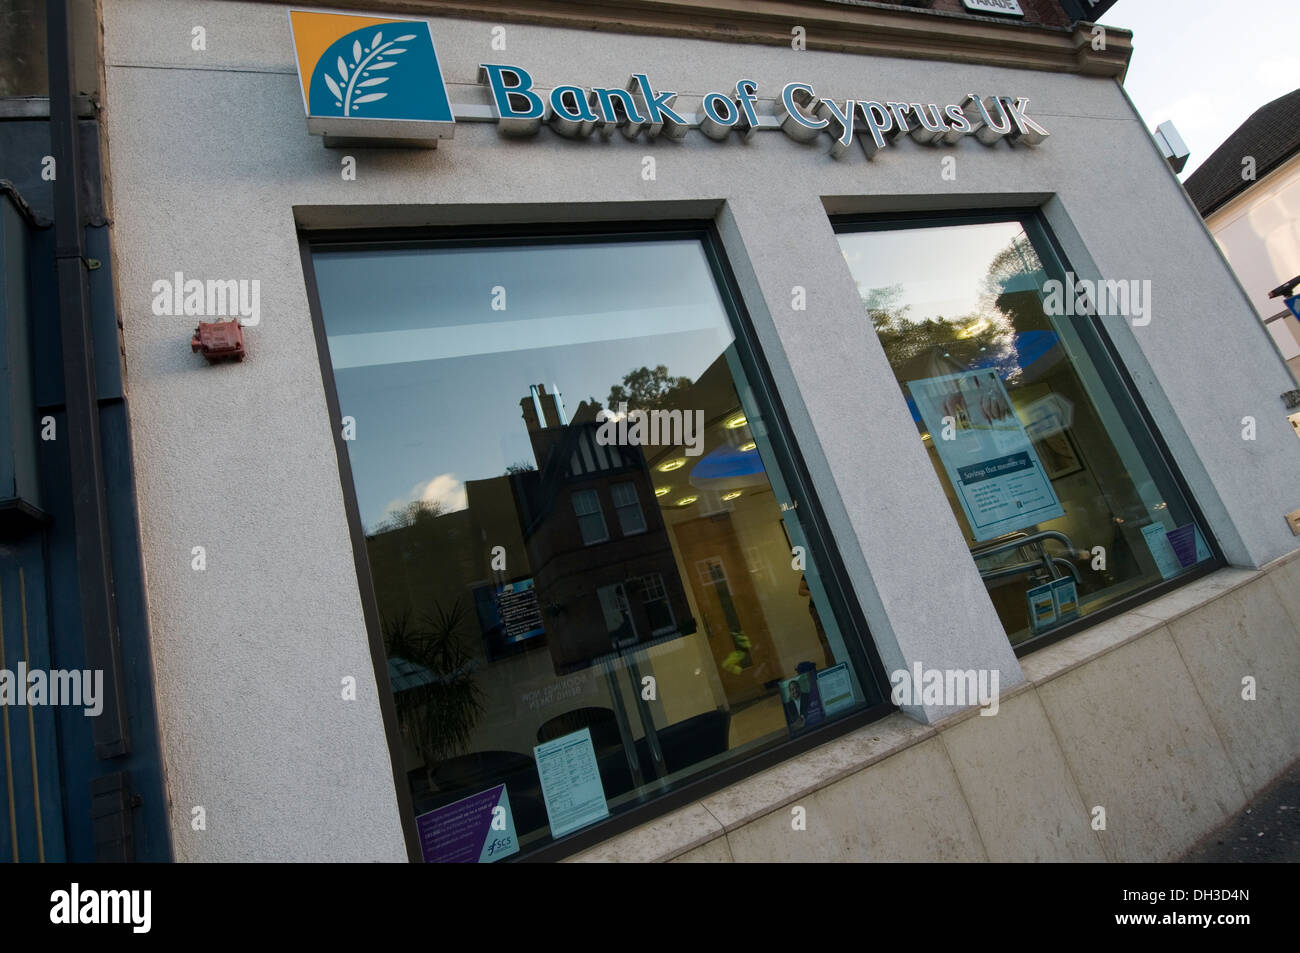 bank of cyprus uk branch branches high street in sutton coldfield Stock Photo